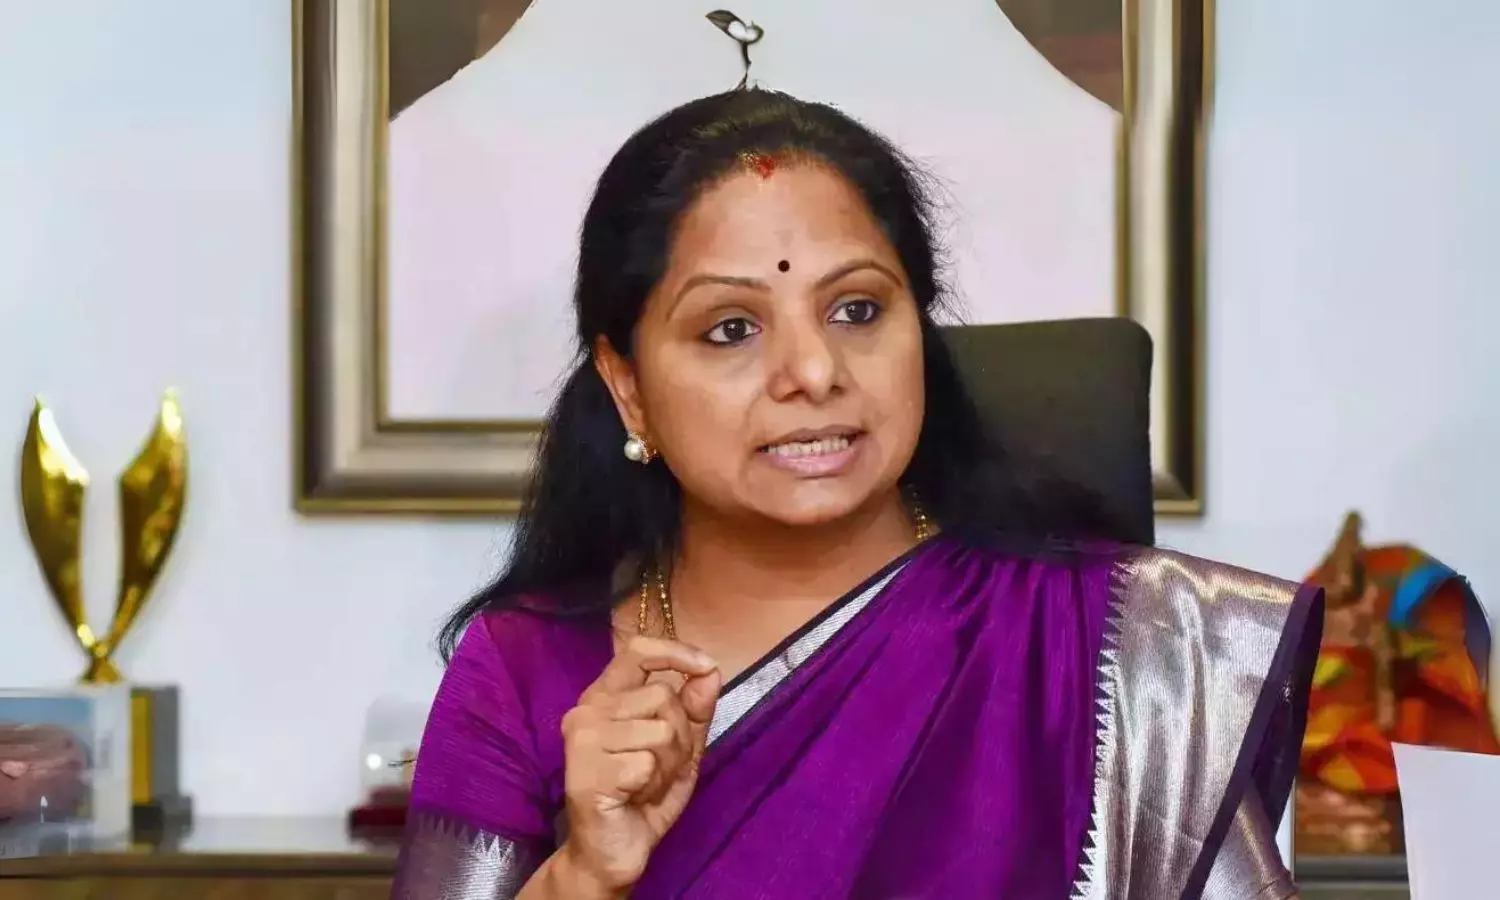 BLS leader K Kavitha produced before court in Delhi excise policy case